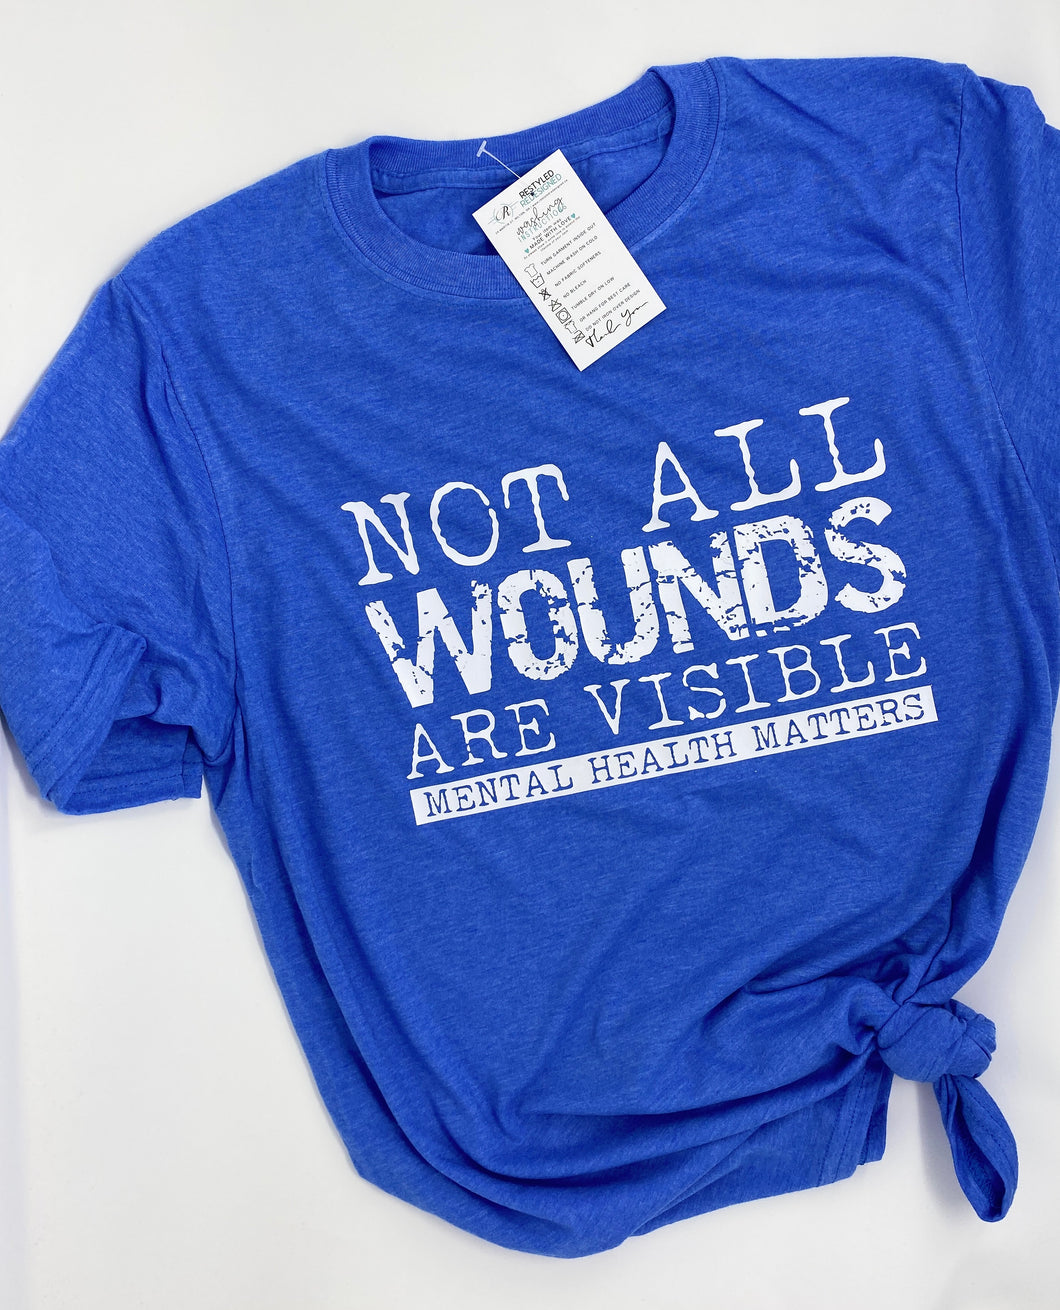 Not All Wounds Are Visible Tee